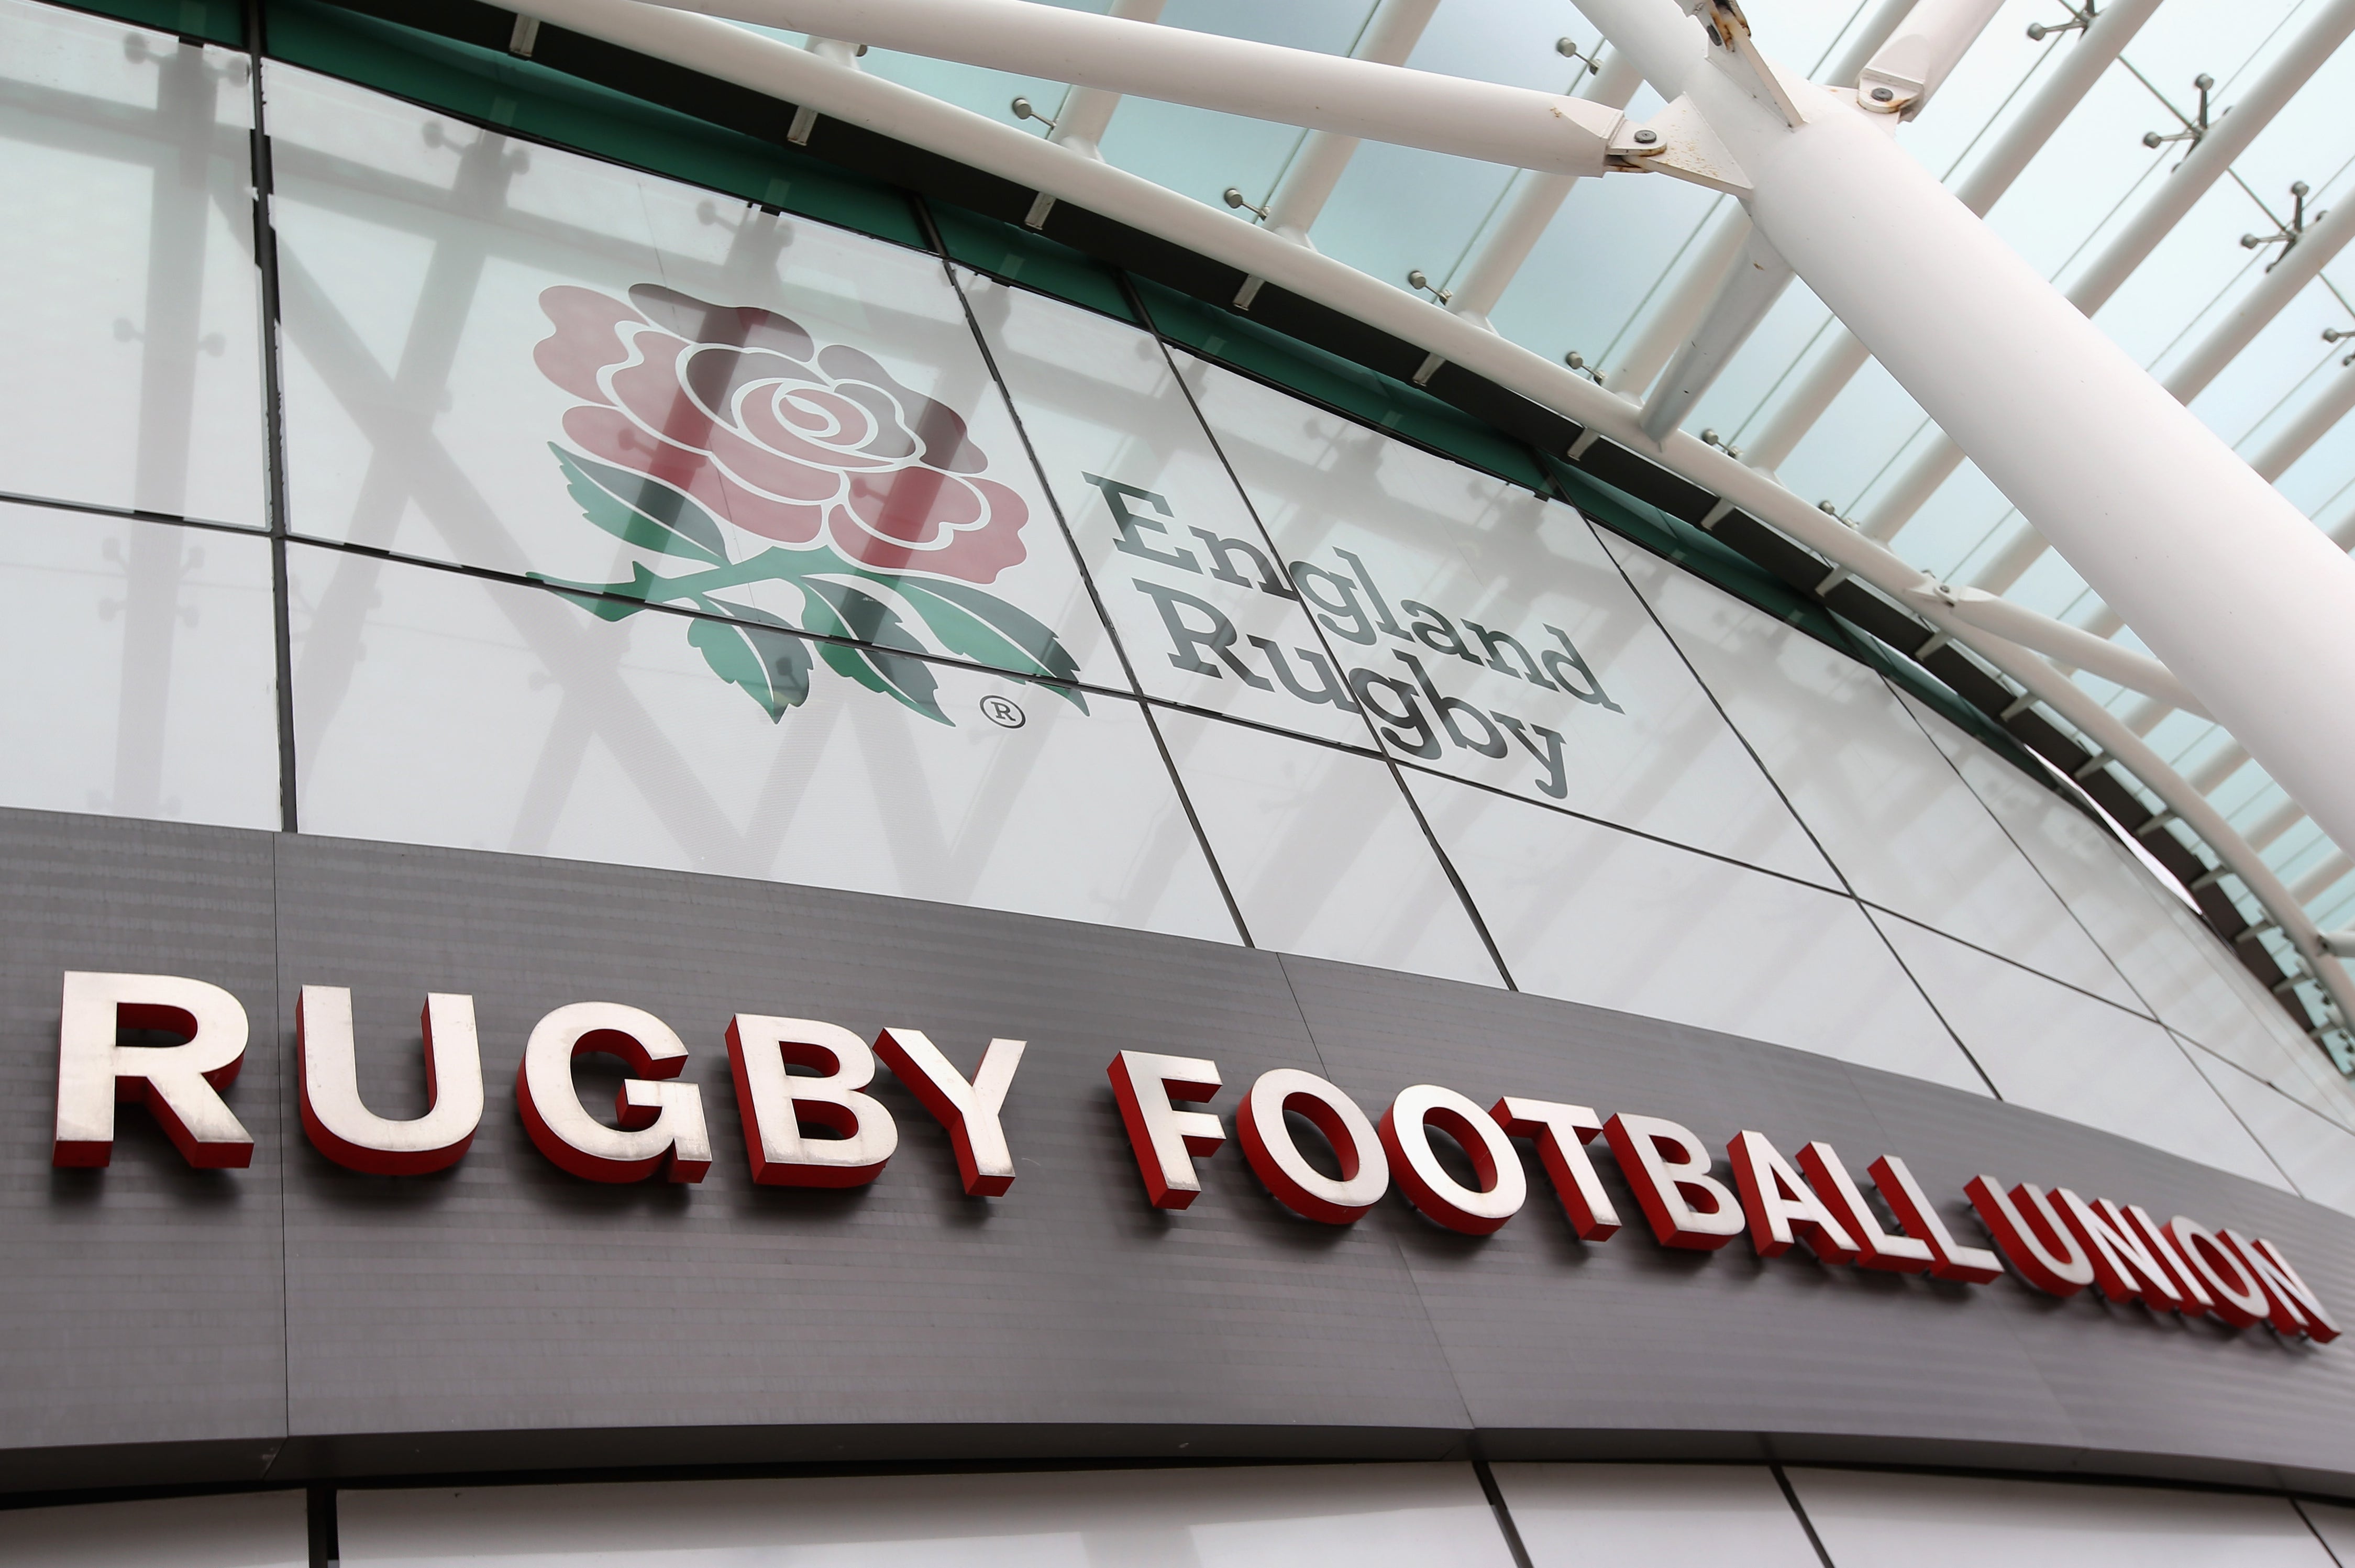 The RFU is set to revamp parts of English rugby